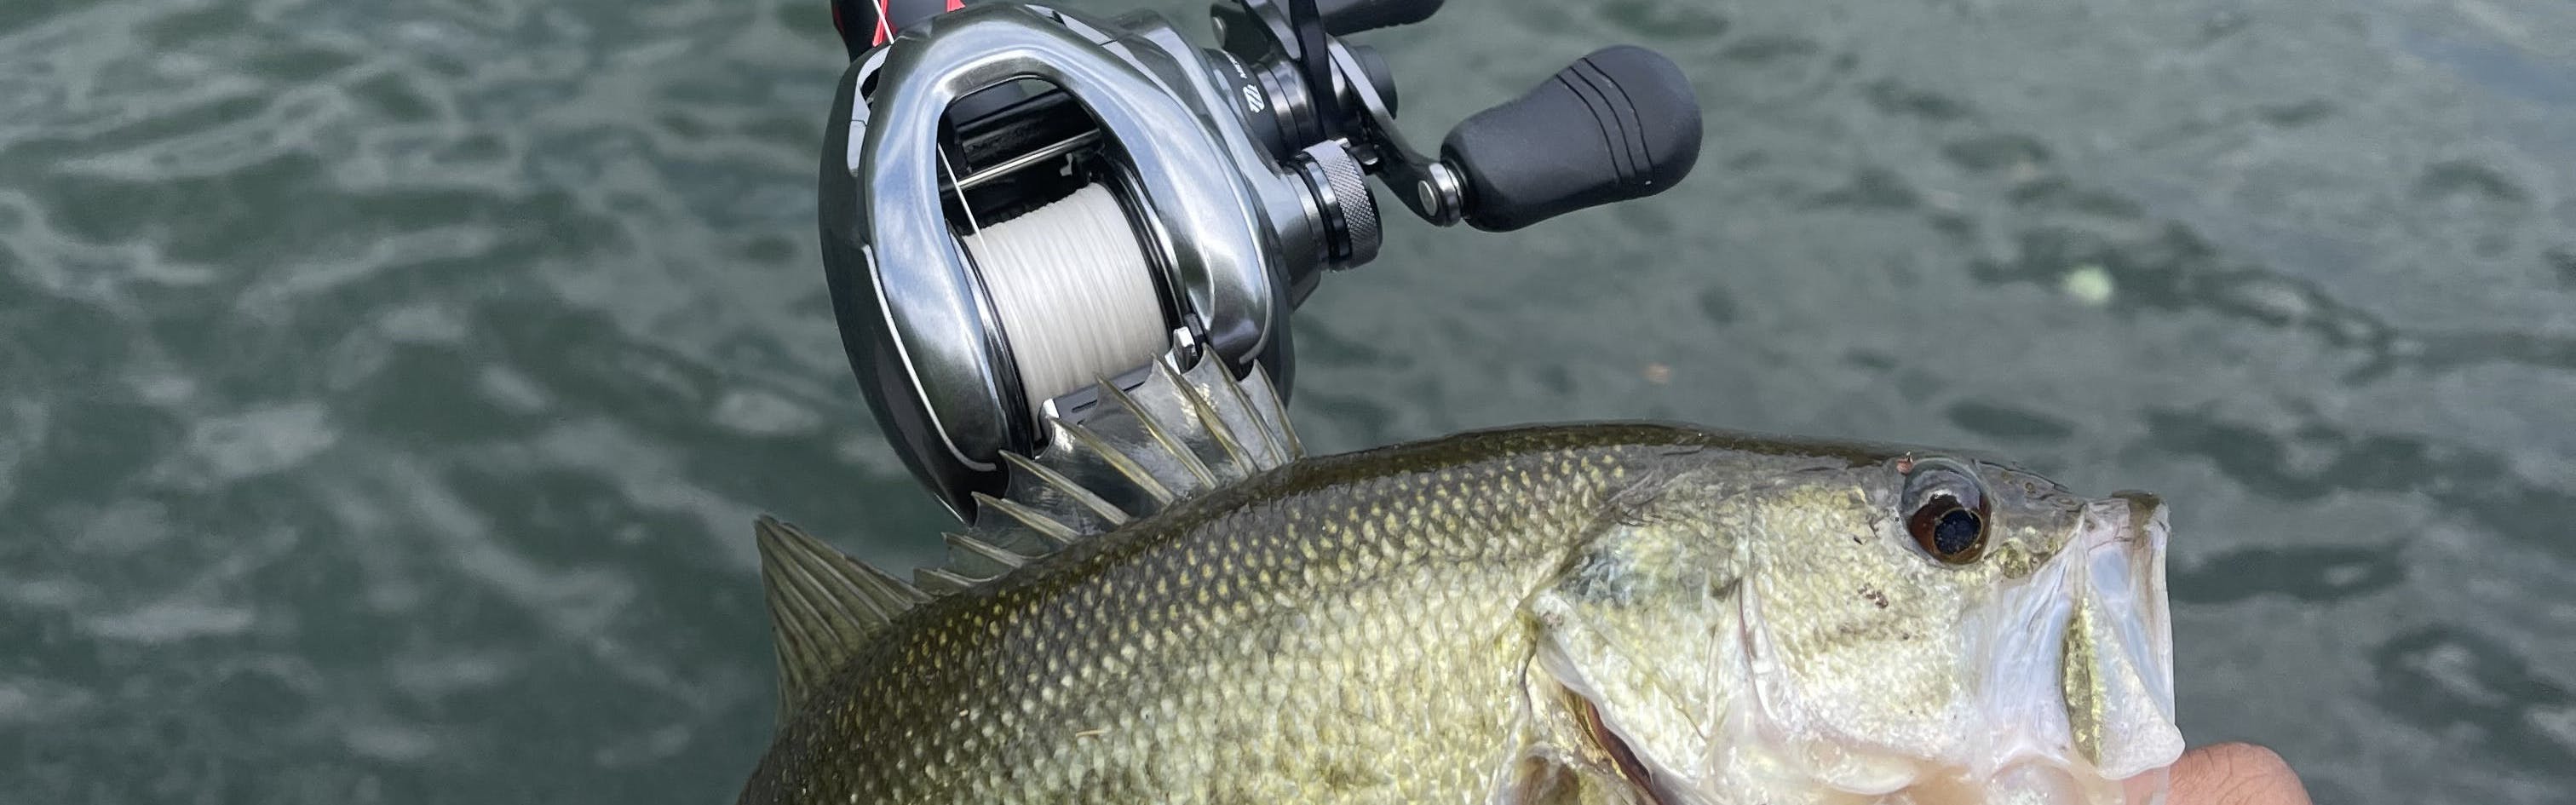 A bass in front of the Shimano Metanium DC reel.